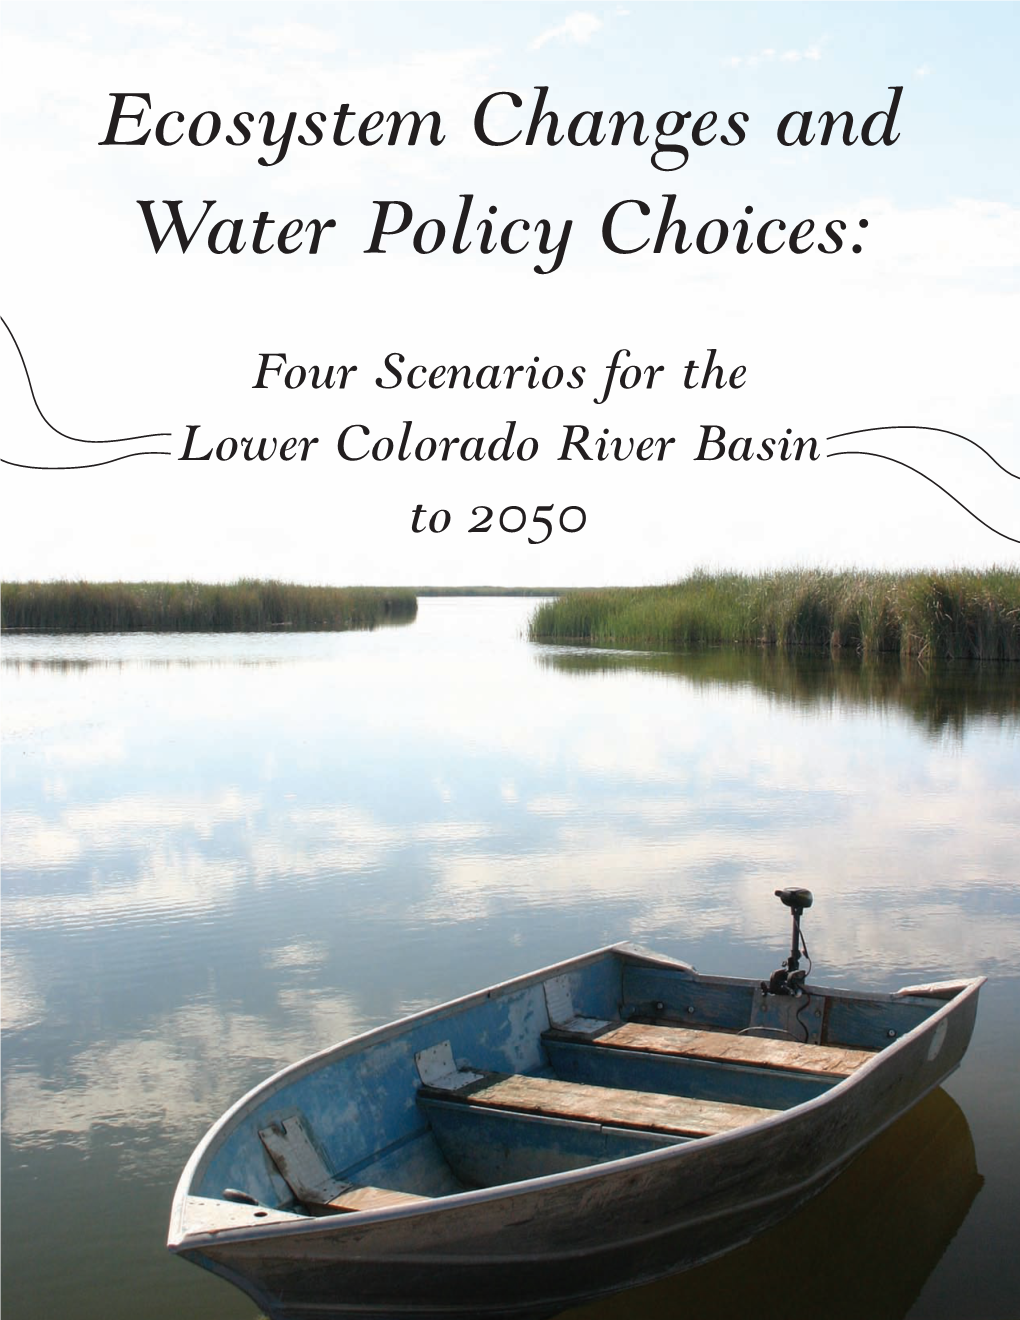 Ecosystem Changes and Water Policy Choices